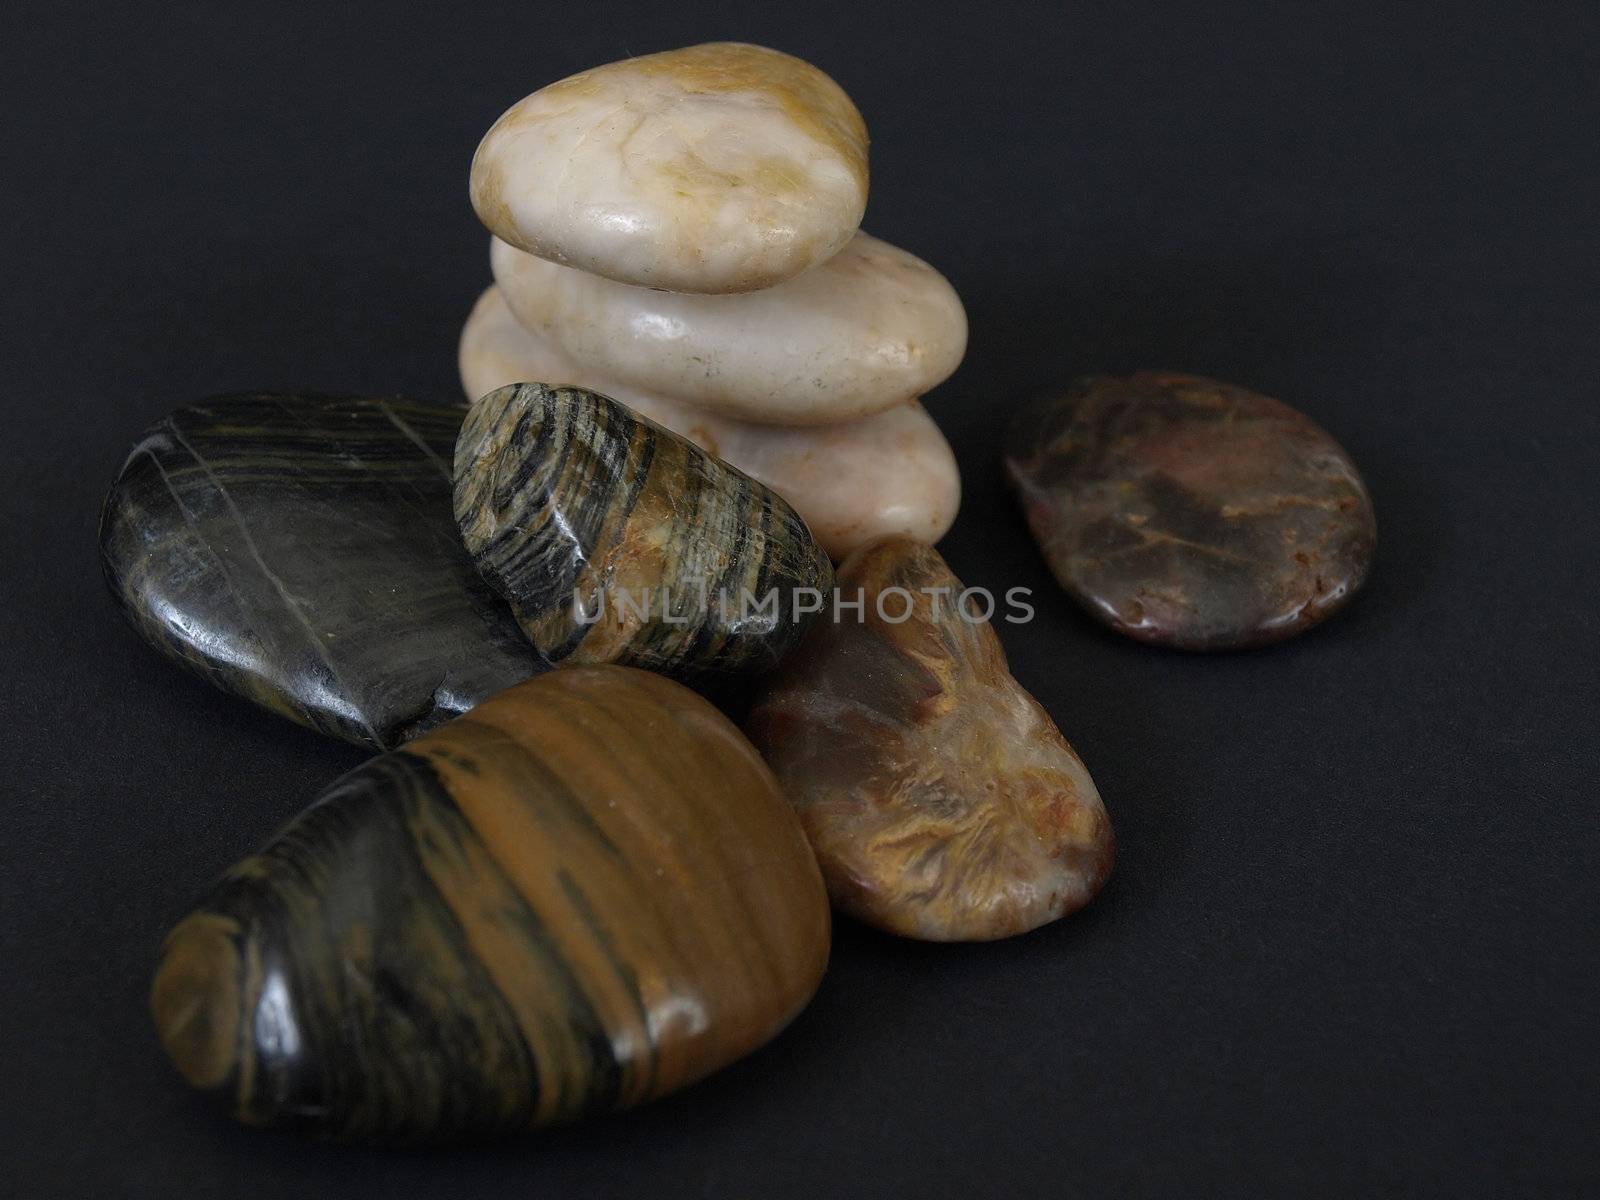 Smooth polished stones stacked and single against a black background.